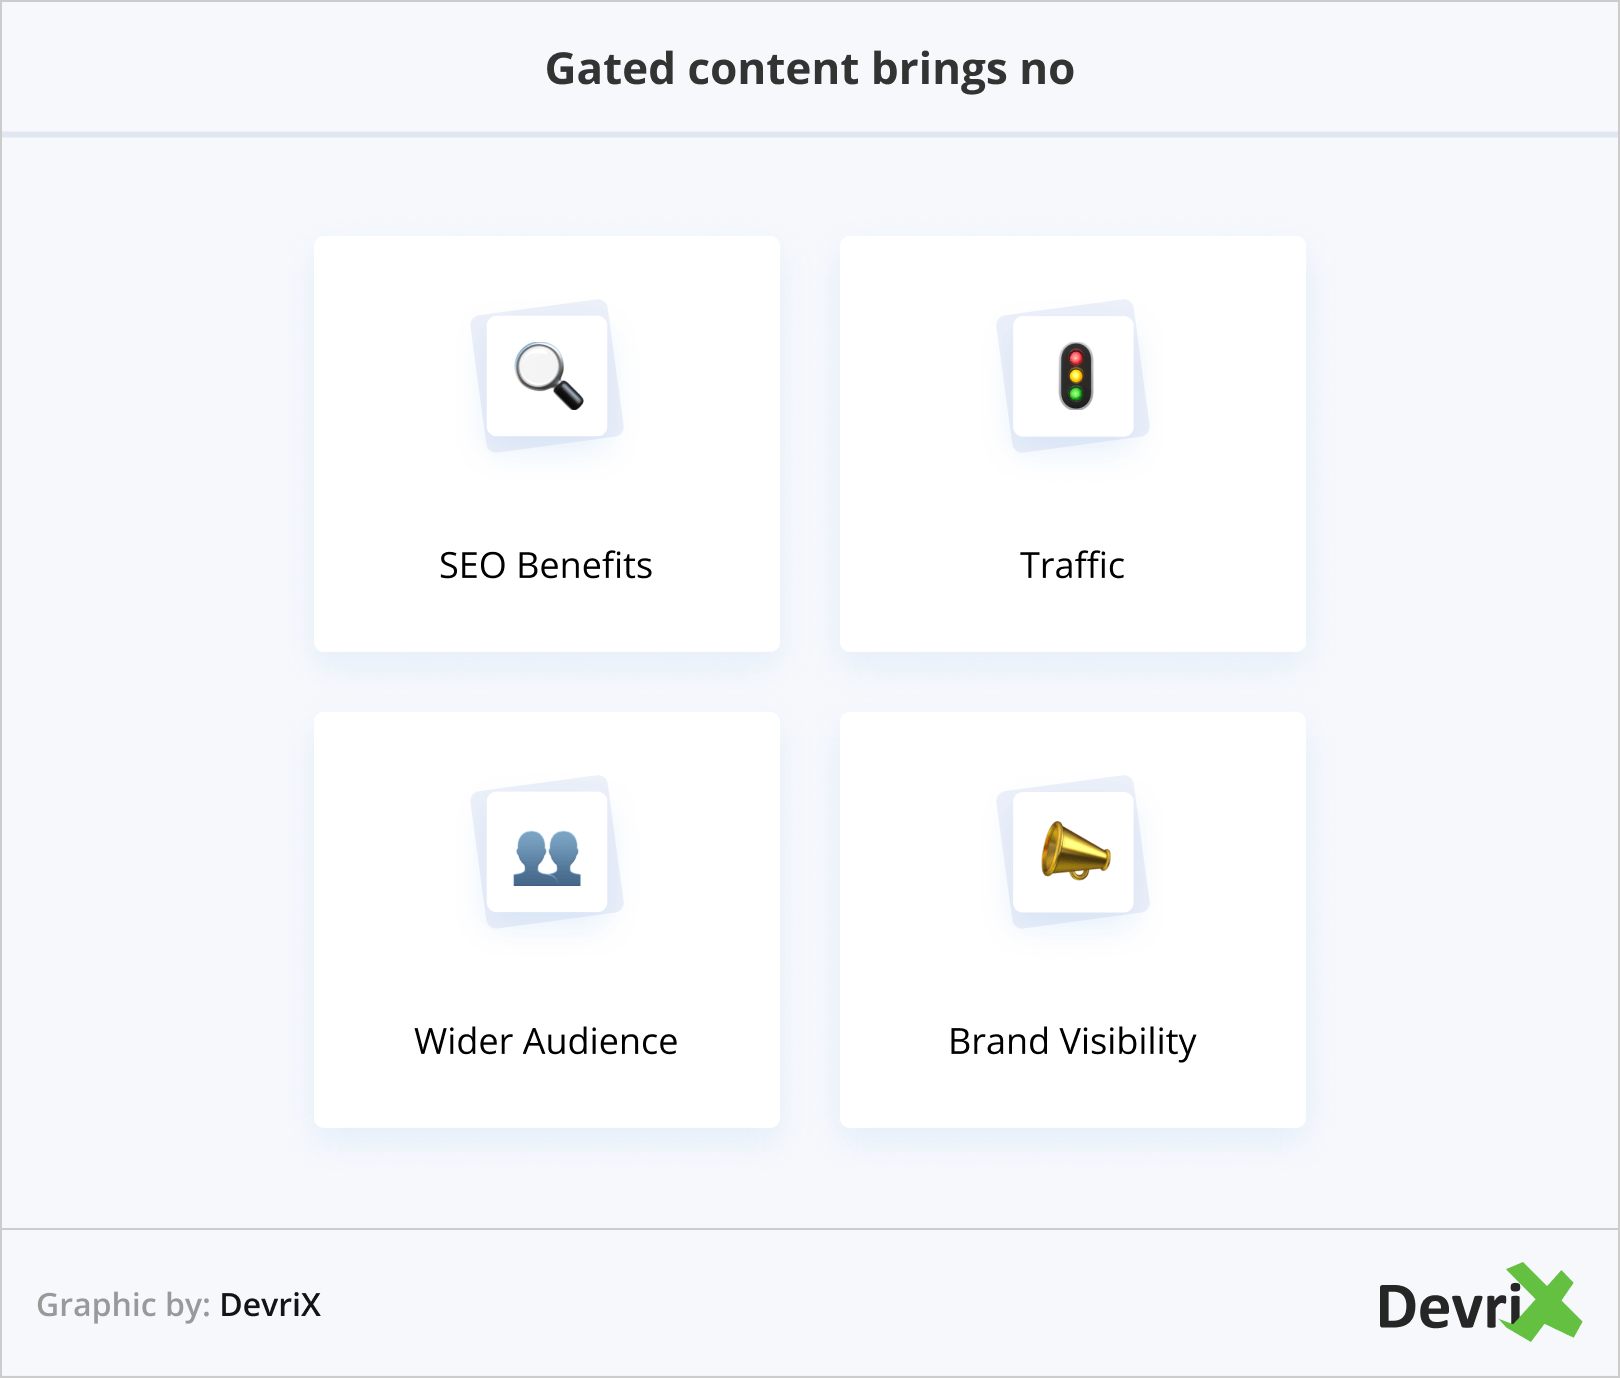 Gated content brings no